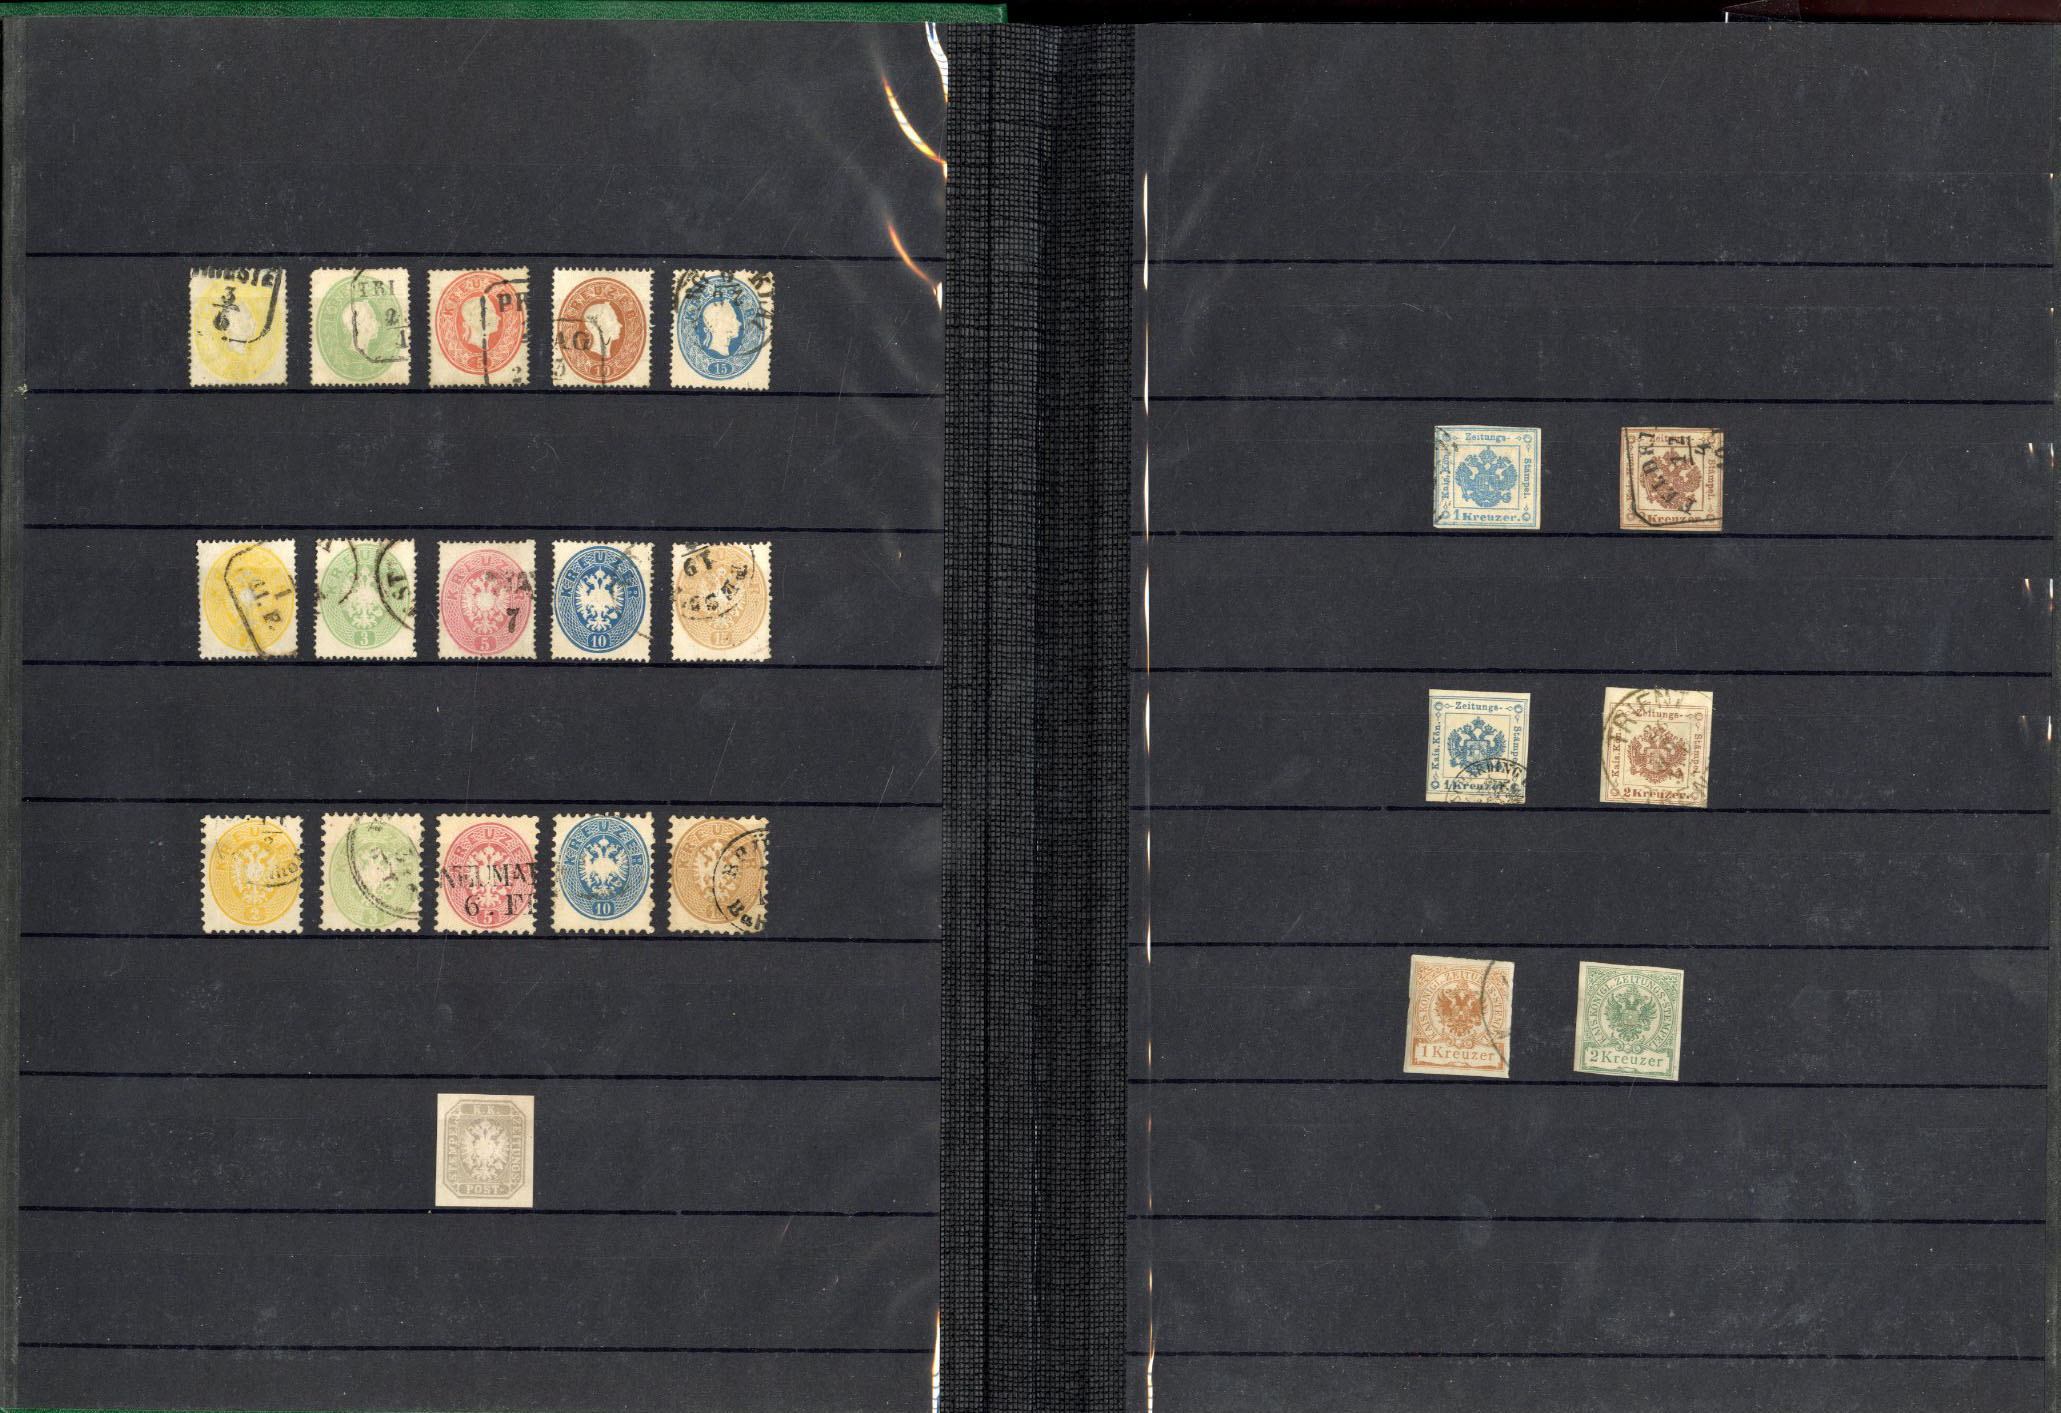 Lot 1407 - LARGE LOTS AND COLLECTIONS French Southern Antarctic Territories (TAAF)  -  Cherrystone Auctions U.S. & Worldwide Stamps & Postal History